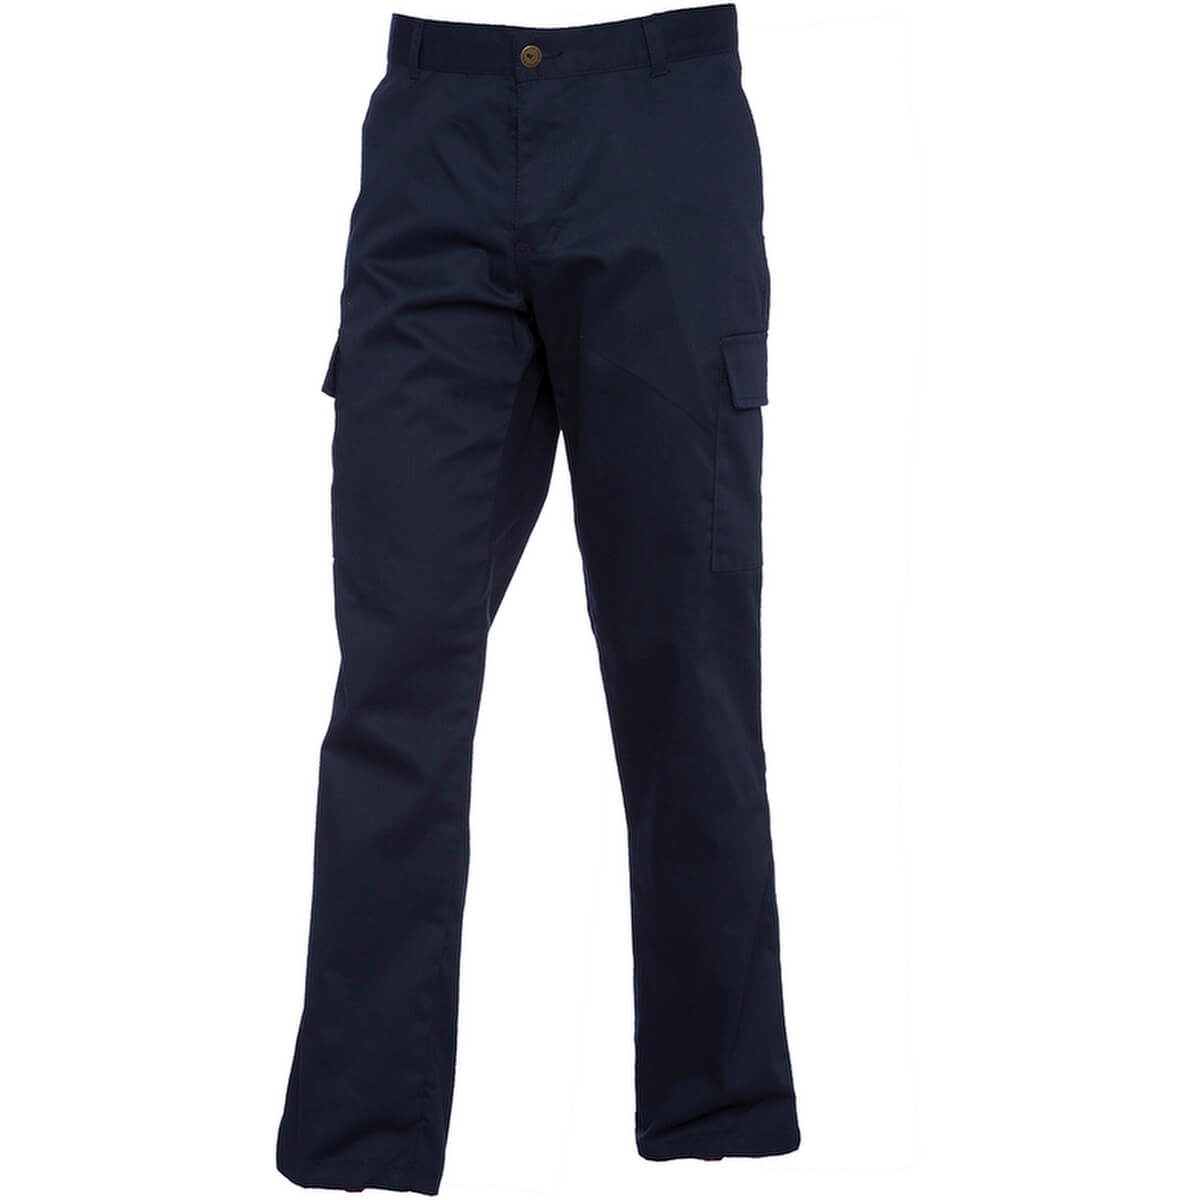 Heavyweight Poly Cotton Cargo Trousers In Black, Navy, Grey -  redoakdirect.com